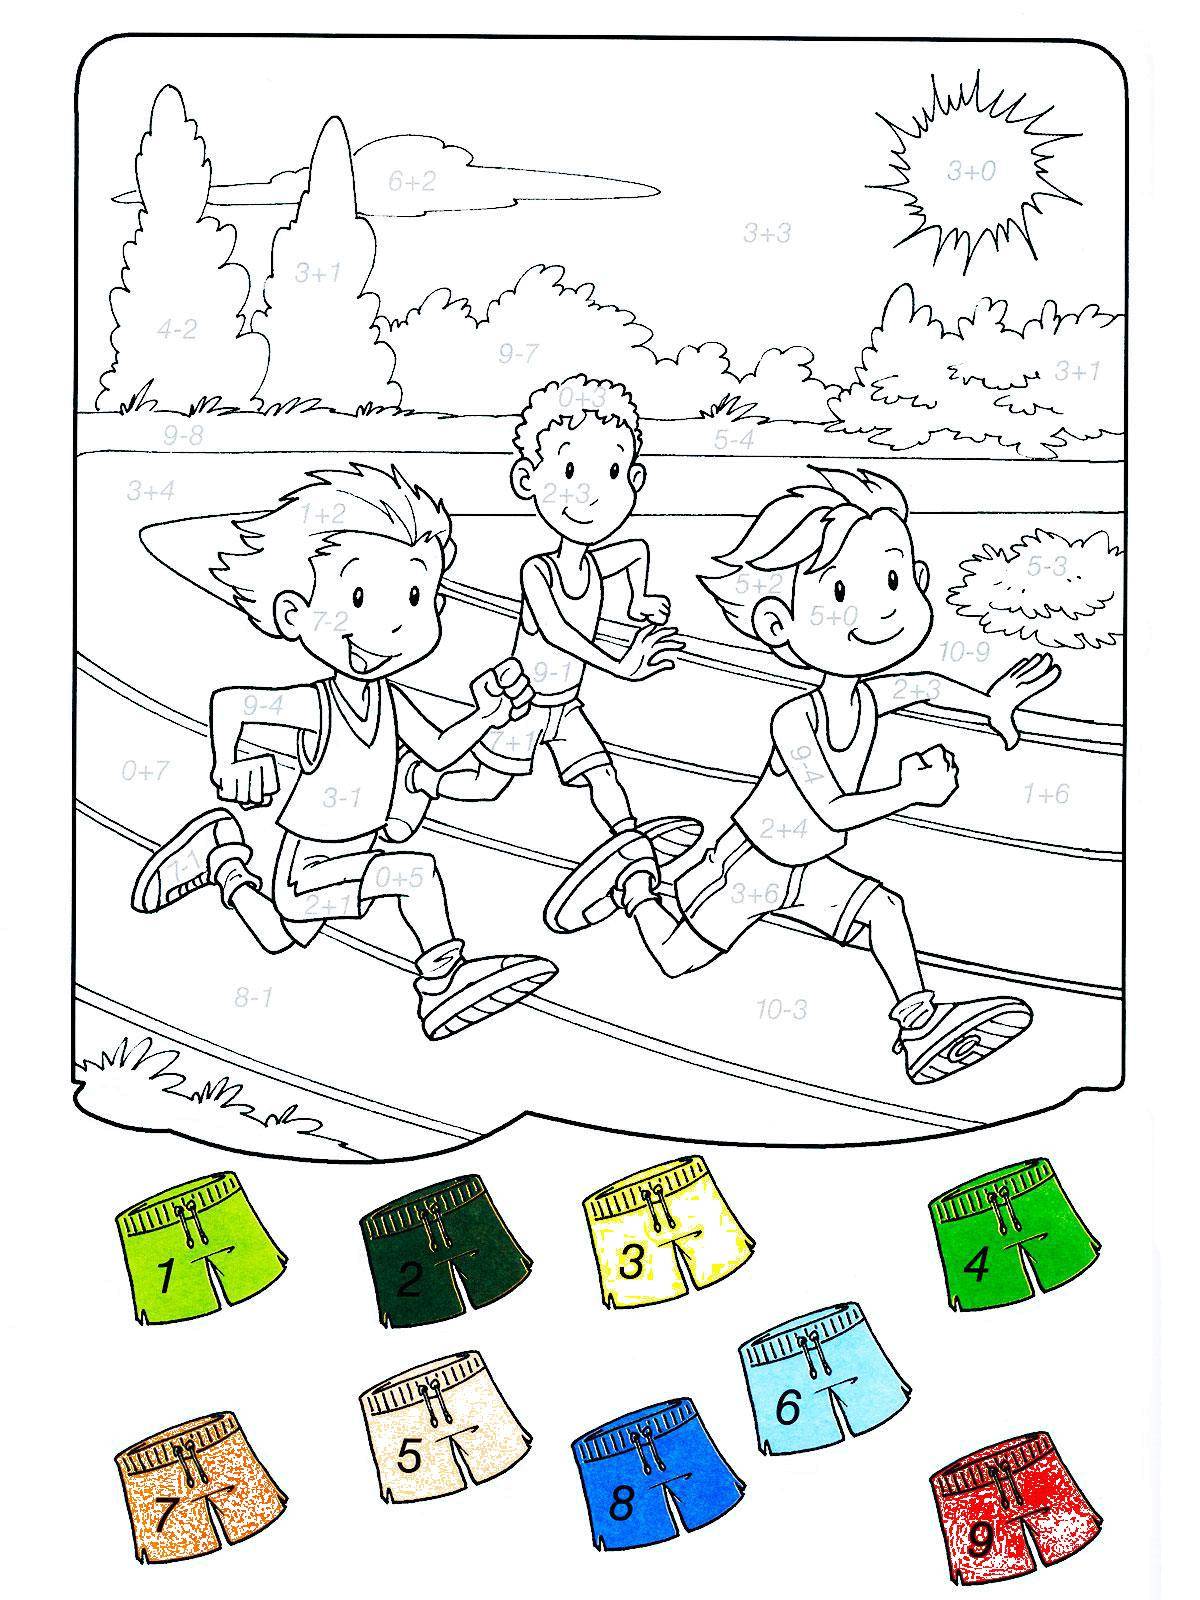 Coloring Color runners deciding examples. Category mathematical coloring pages. Tags:  running , sports, kids, examples.